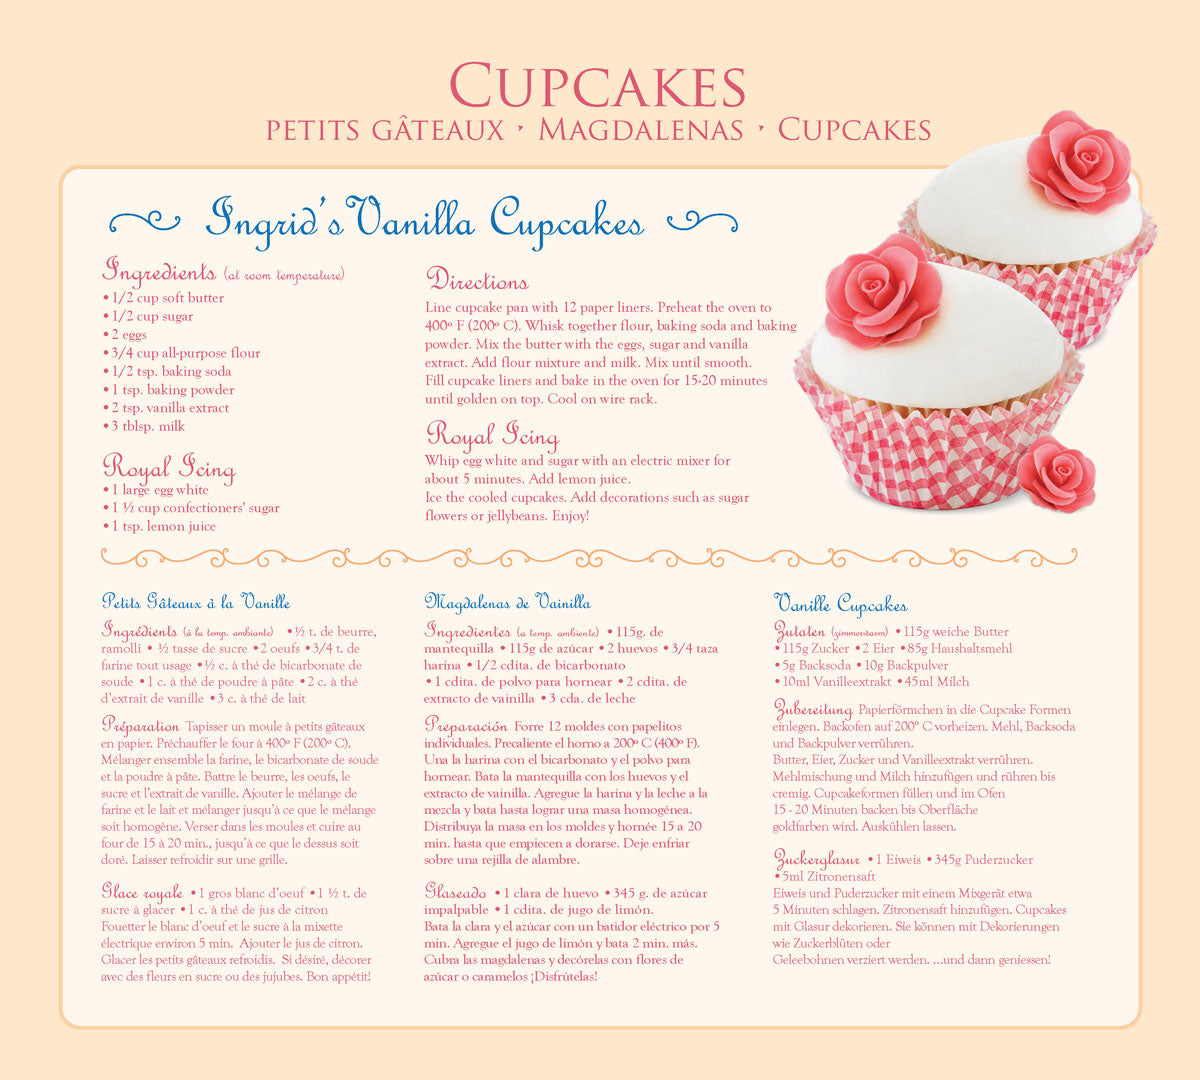 Cupcakes 1000-Piece Puzzle at Puffin Spot Variety